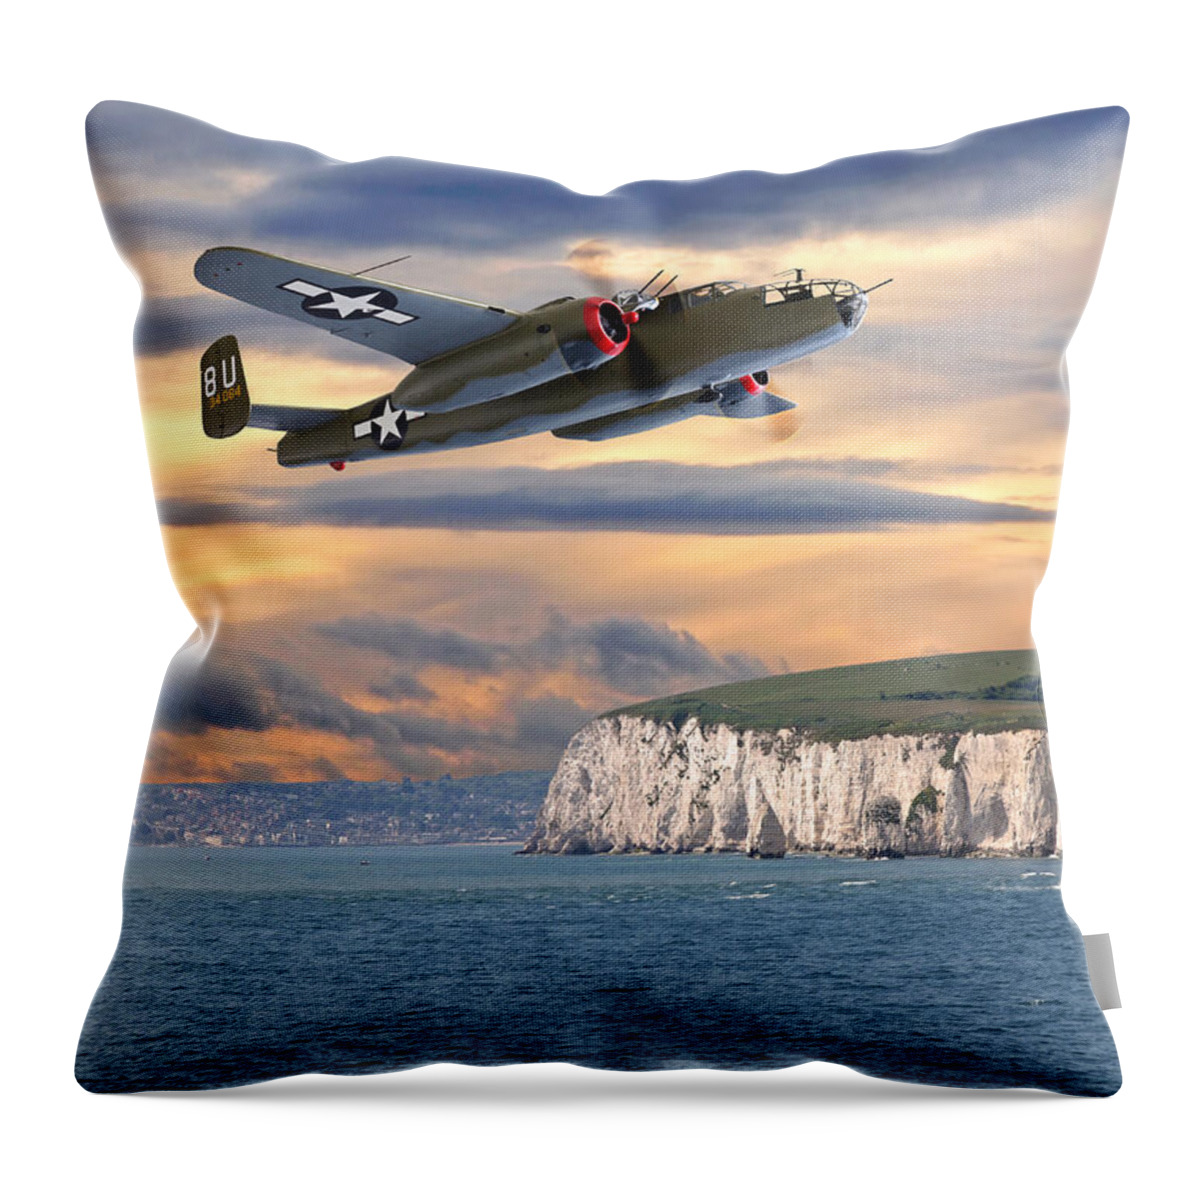 Aviation Throw Pillow featuring the photograph Mission Complete B-25 Over White Cliffs Of Dover by Gill Billington